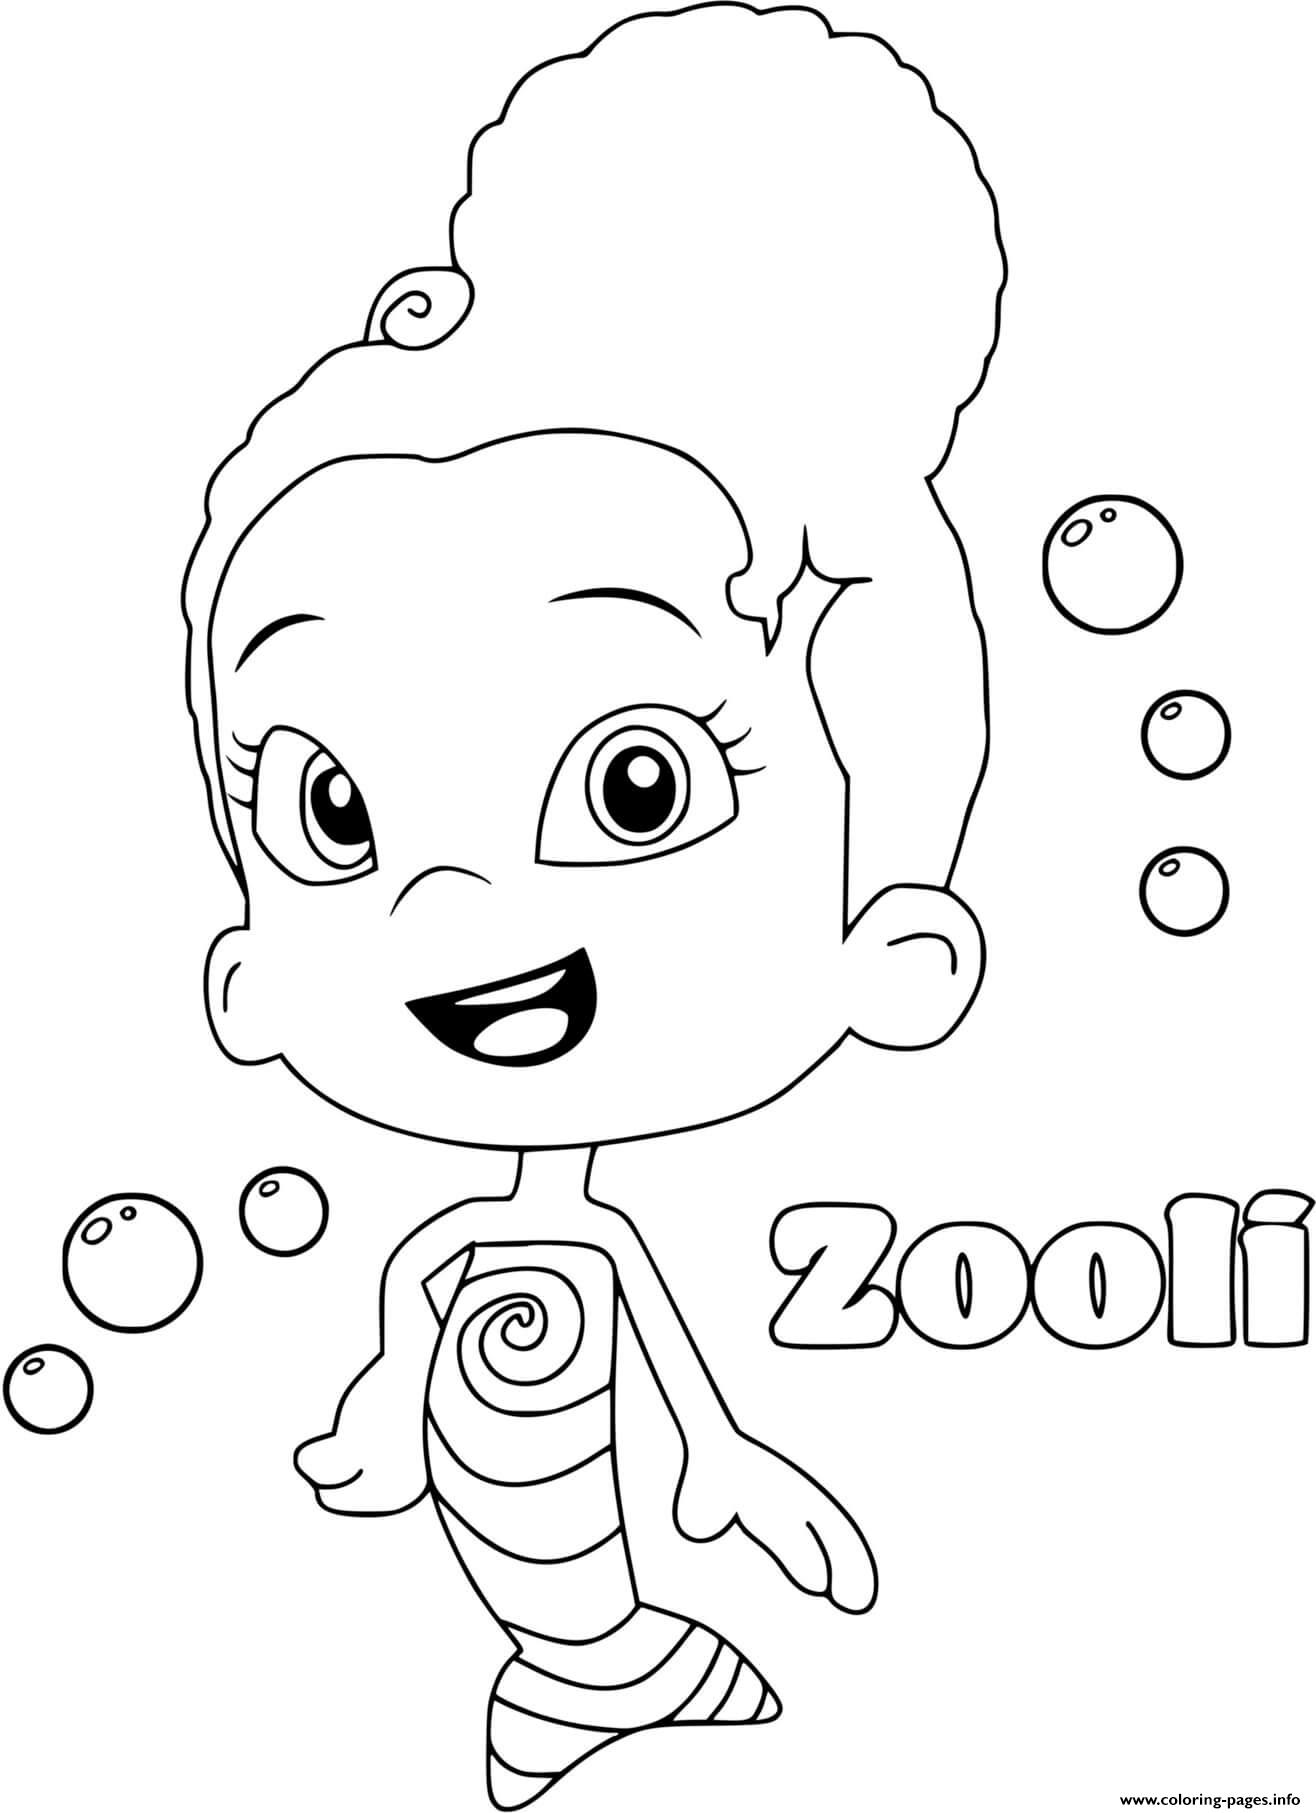 Zooli Bubble Guppies coloring pages